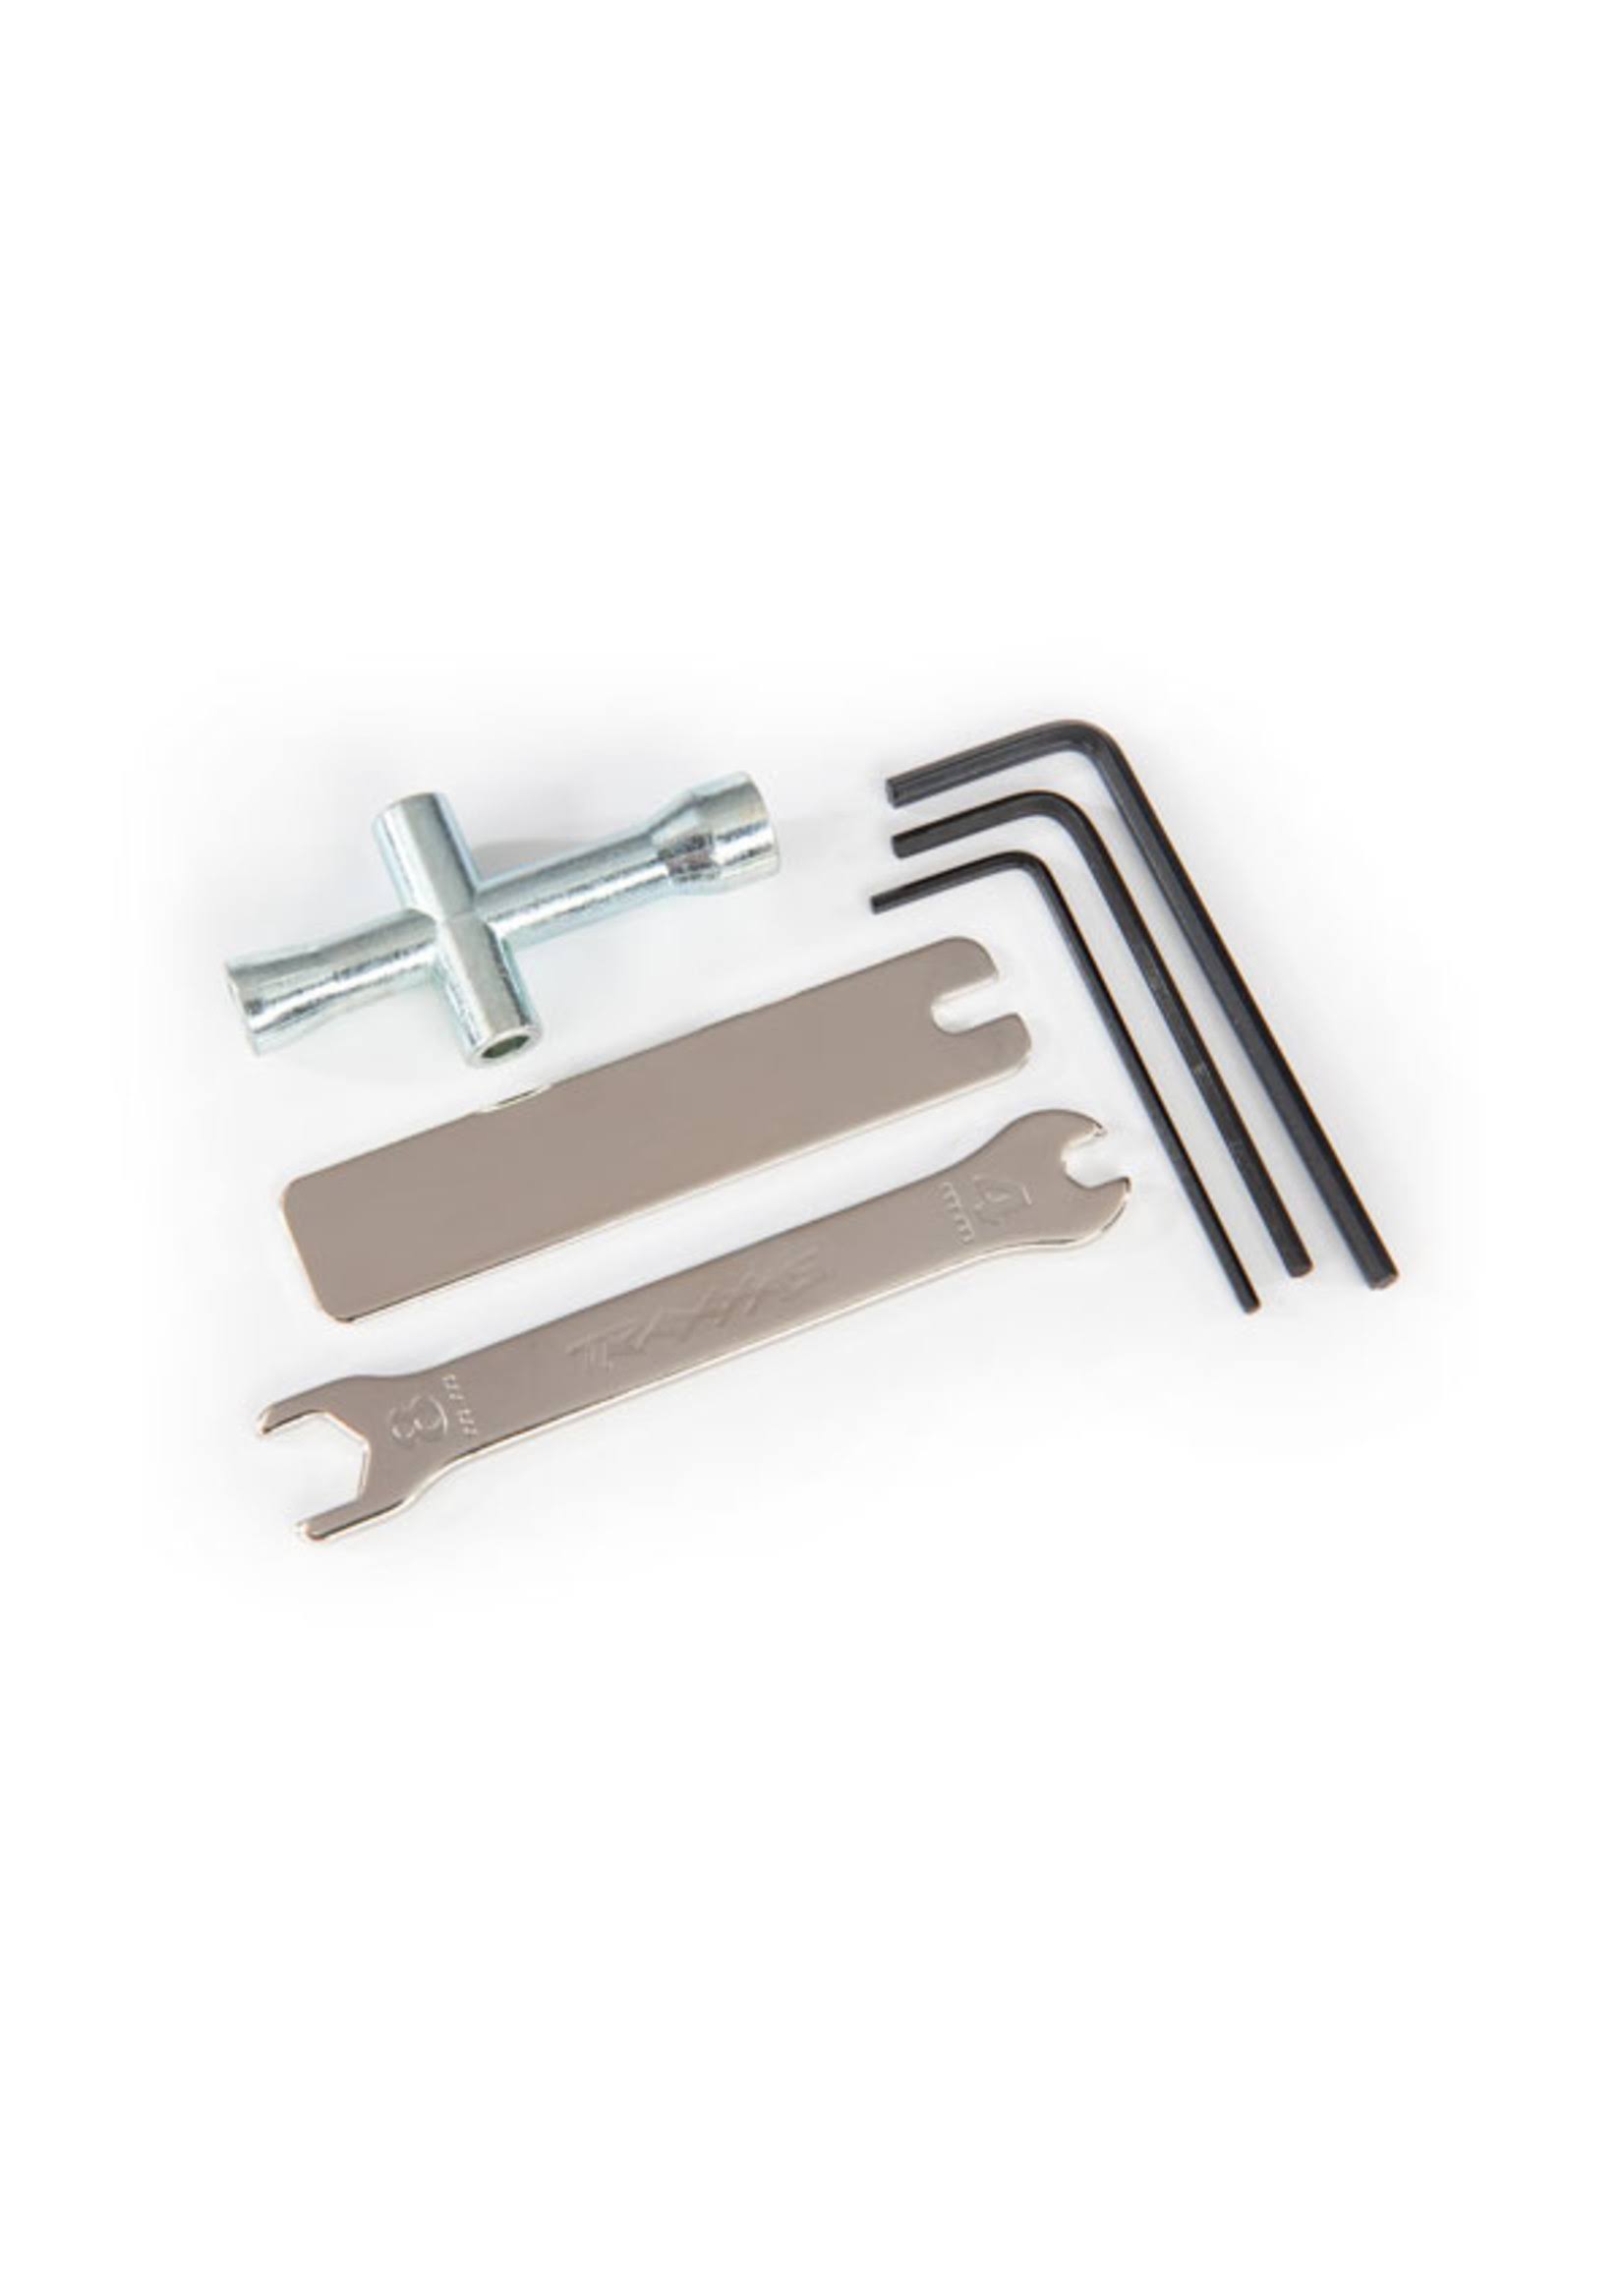 Traxxas Tool Set Hex Wrench 2748R